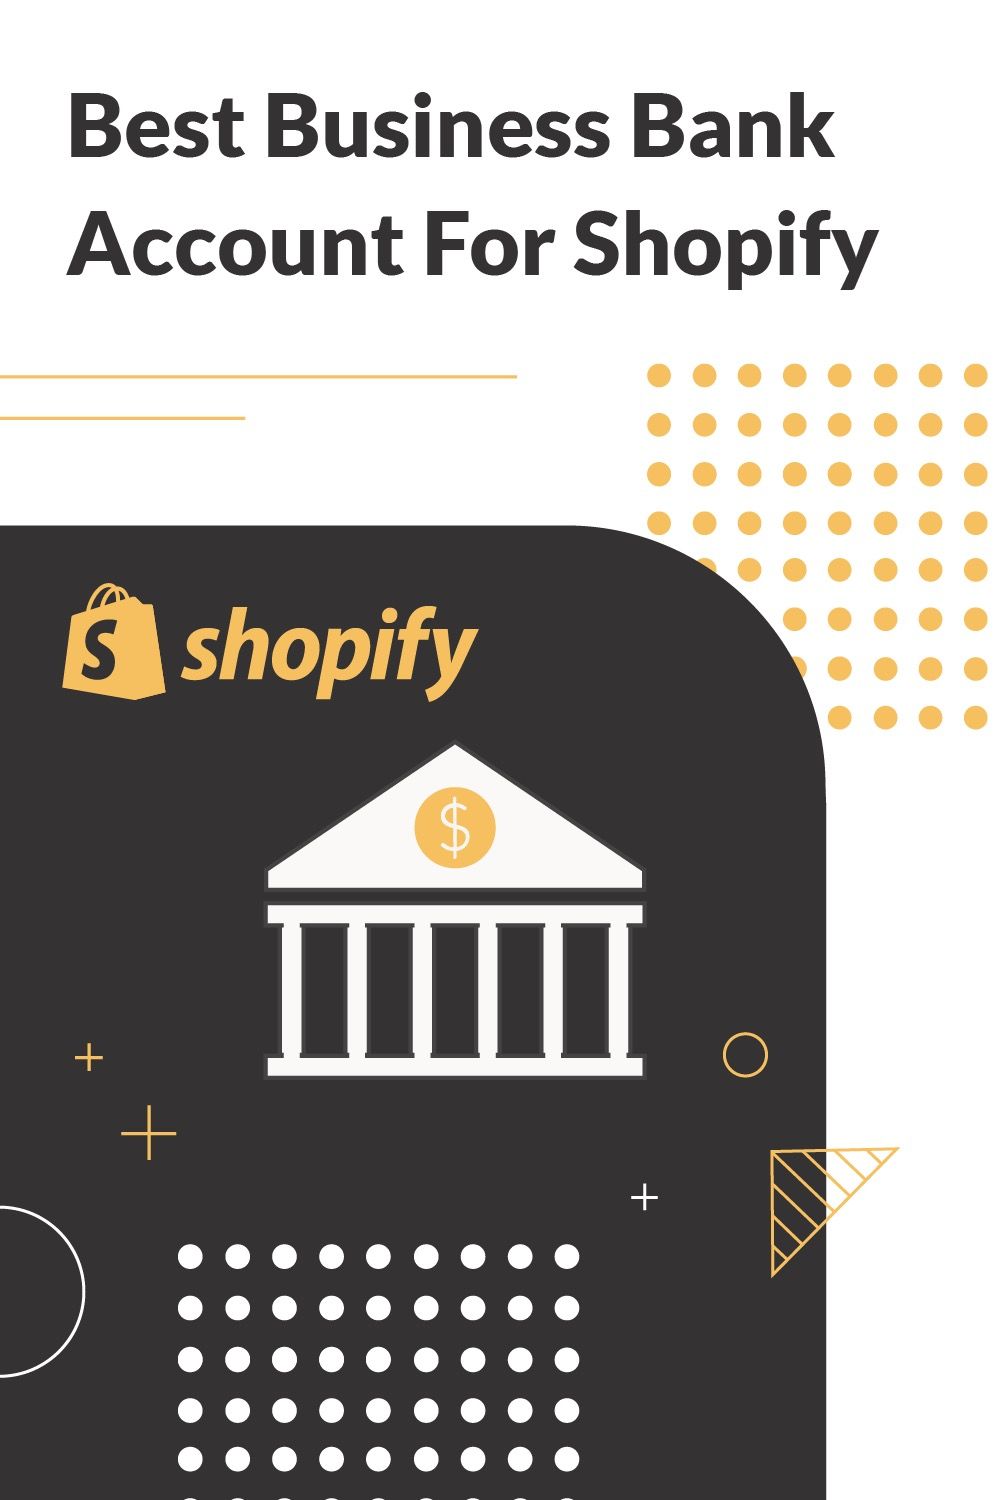 best business bank account for shopify pinterest image